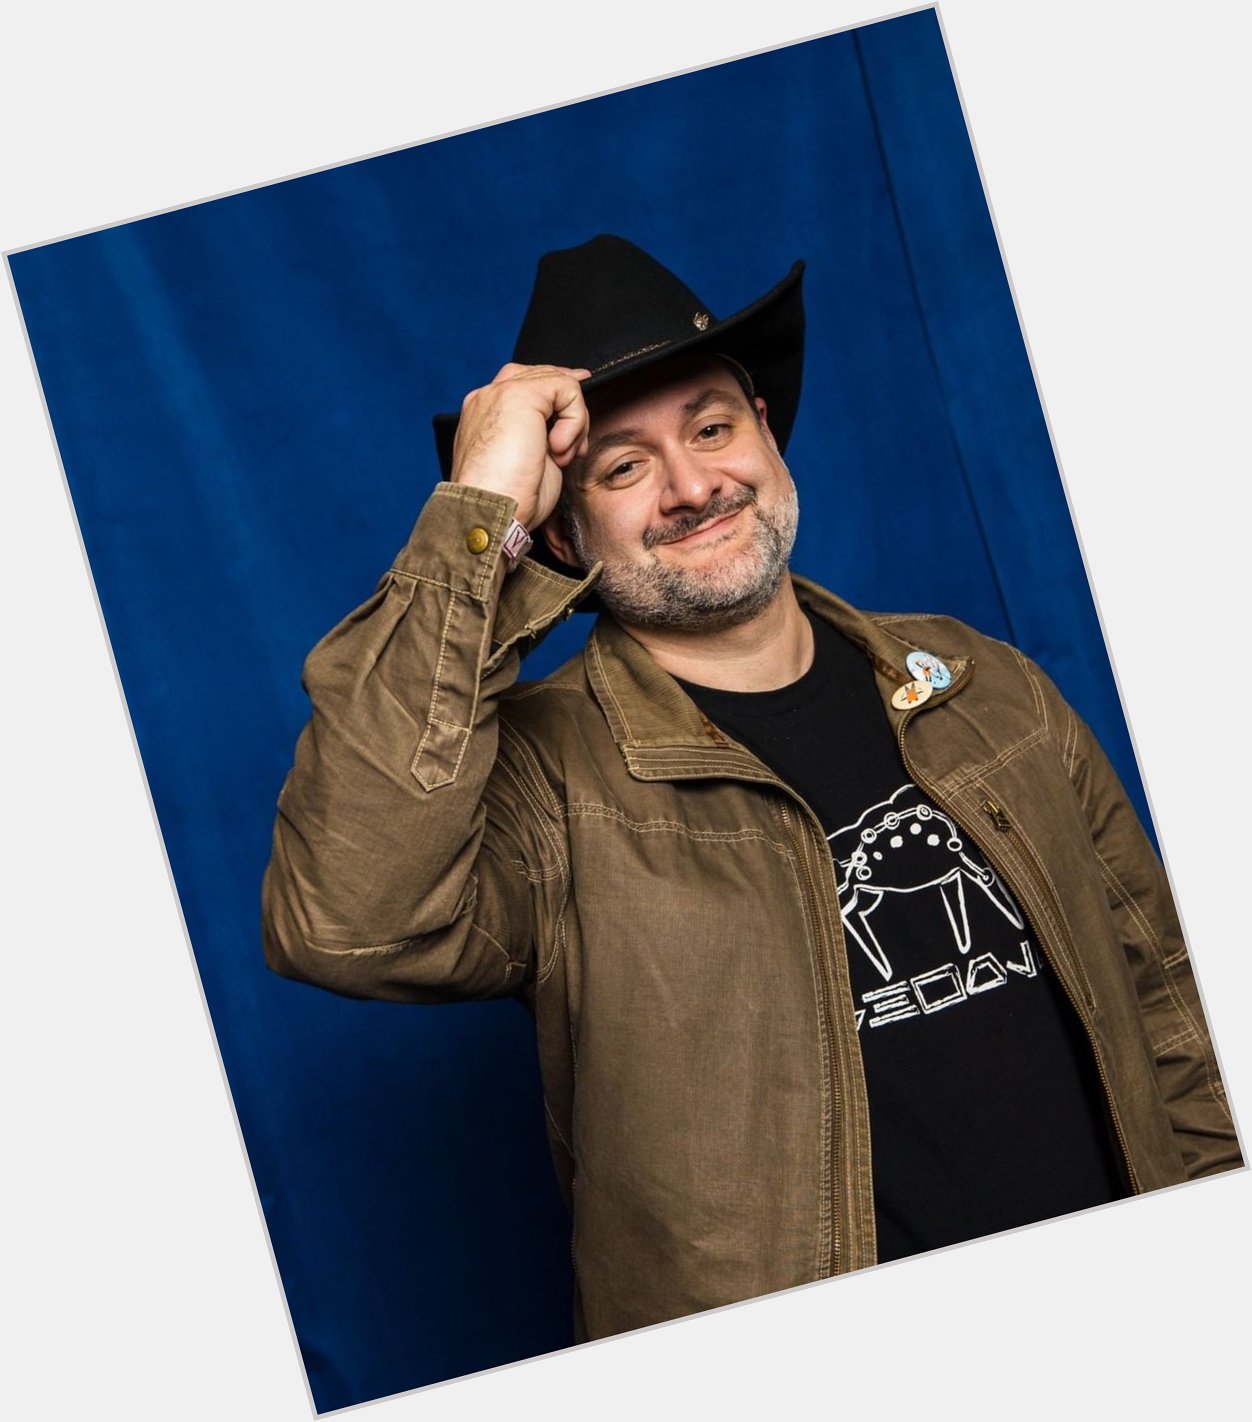      Put on your favorite hat, and help us in wishing Dave Filoni a very happy birthday. 